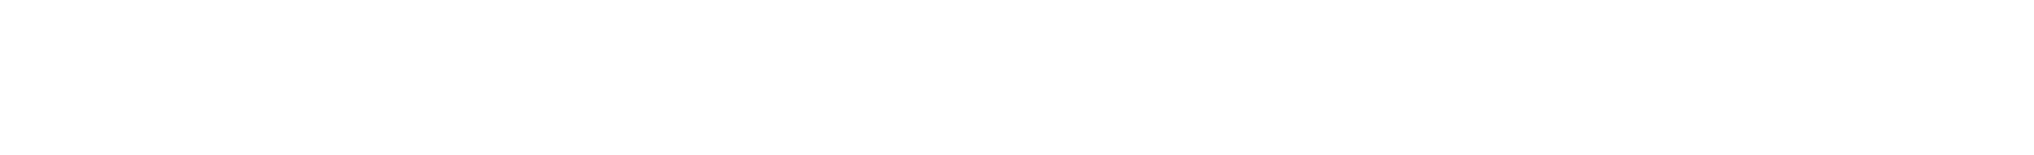 criminal lawyer in toronto social proof | Criminal Lawyer Scarborough | Free Consultation